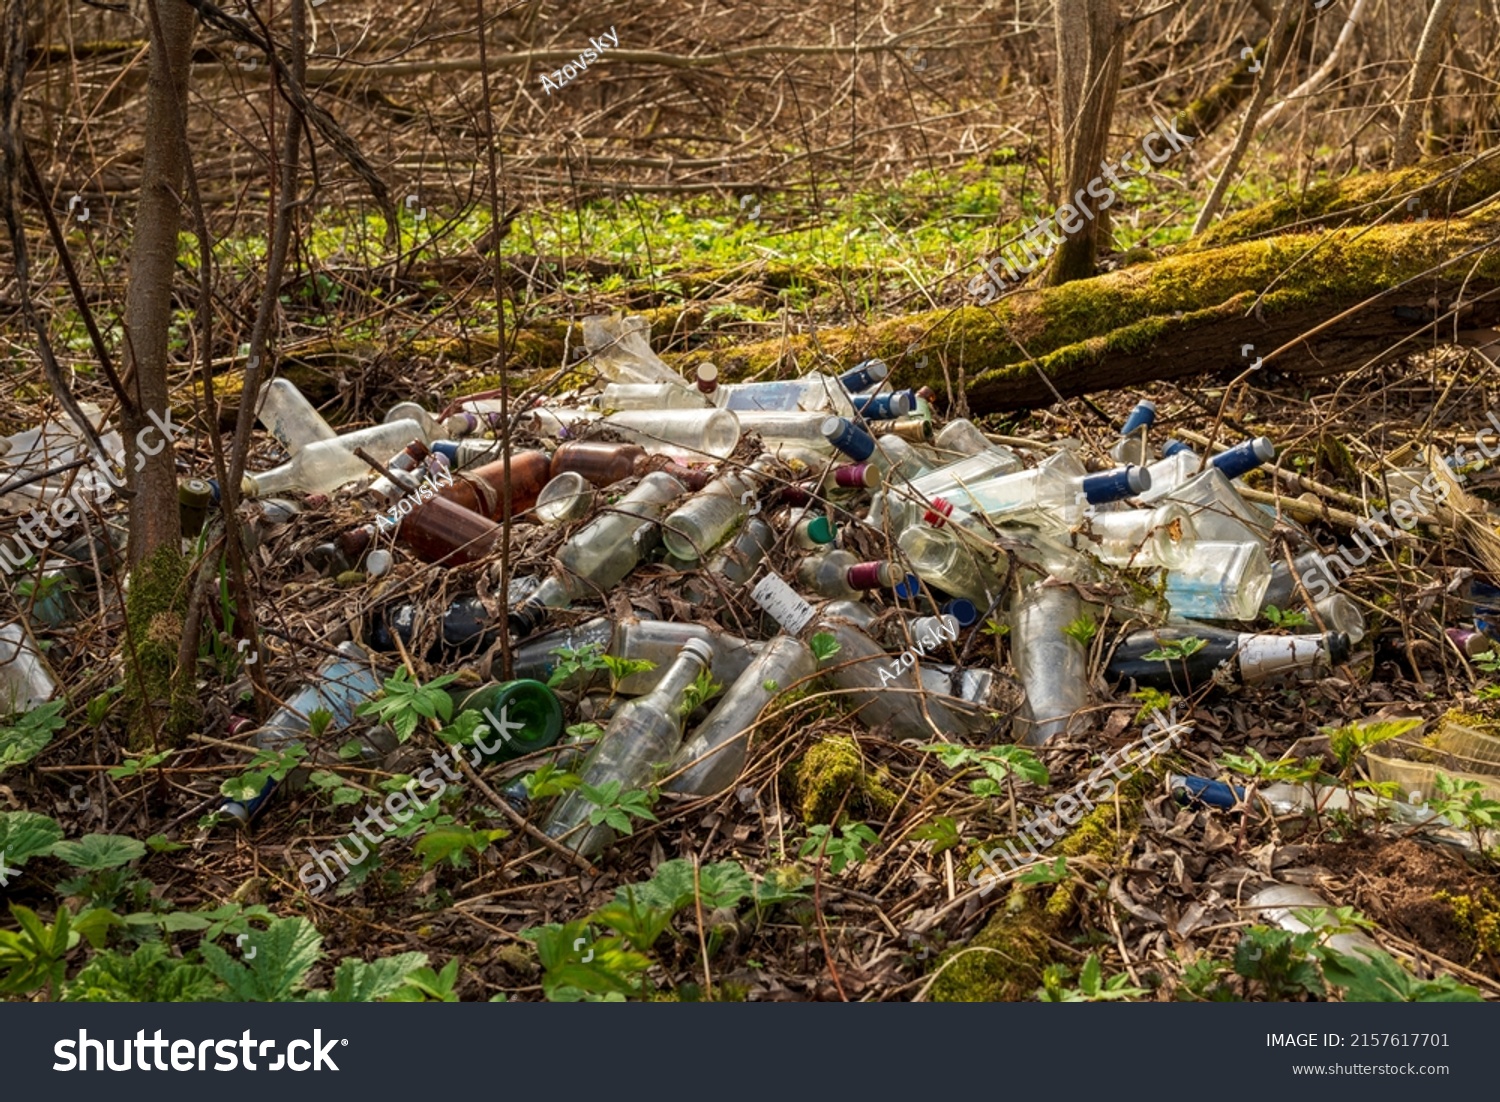 Landfill of glass bottles and garbage on the ground in the forest. The concept of environmental pollution. #2157617701